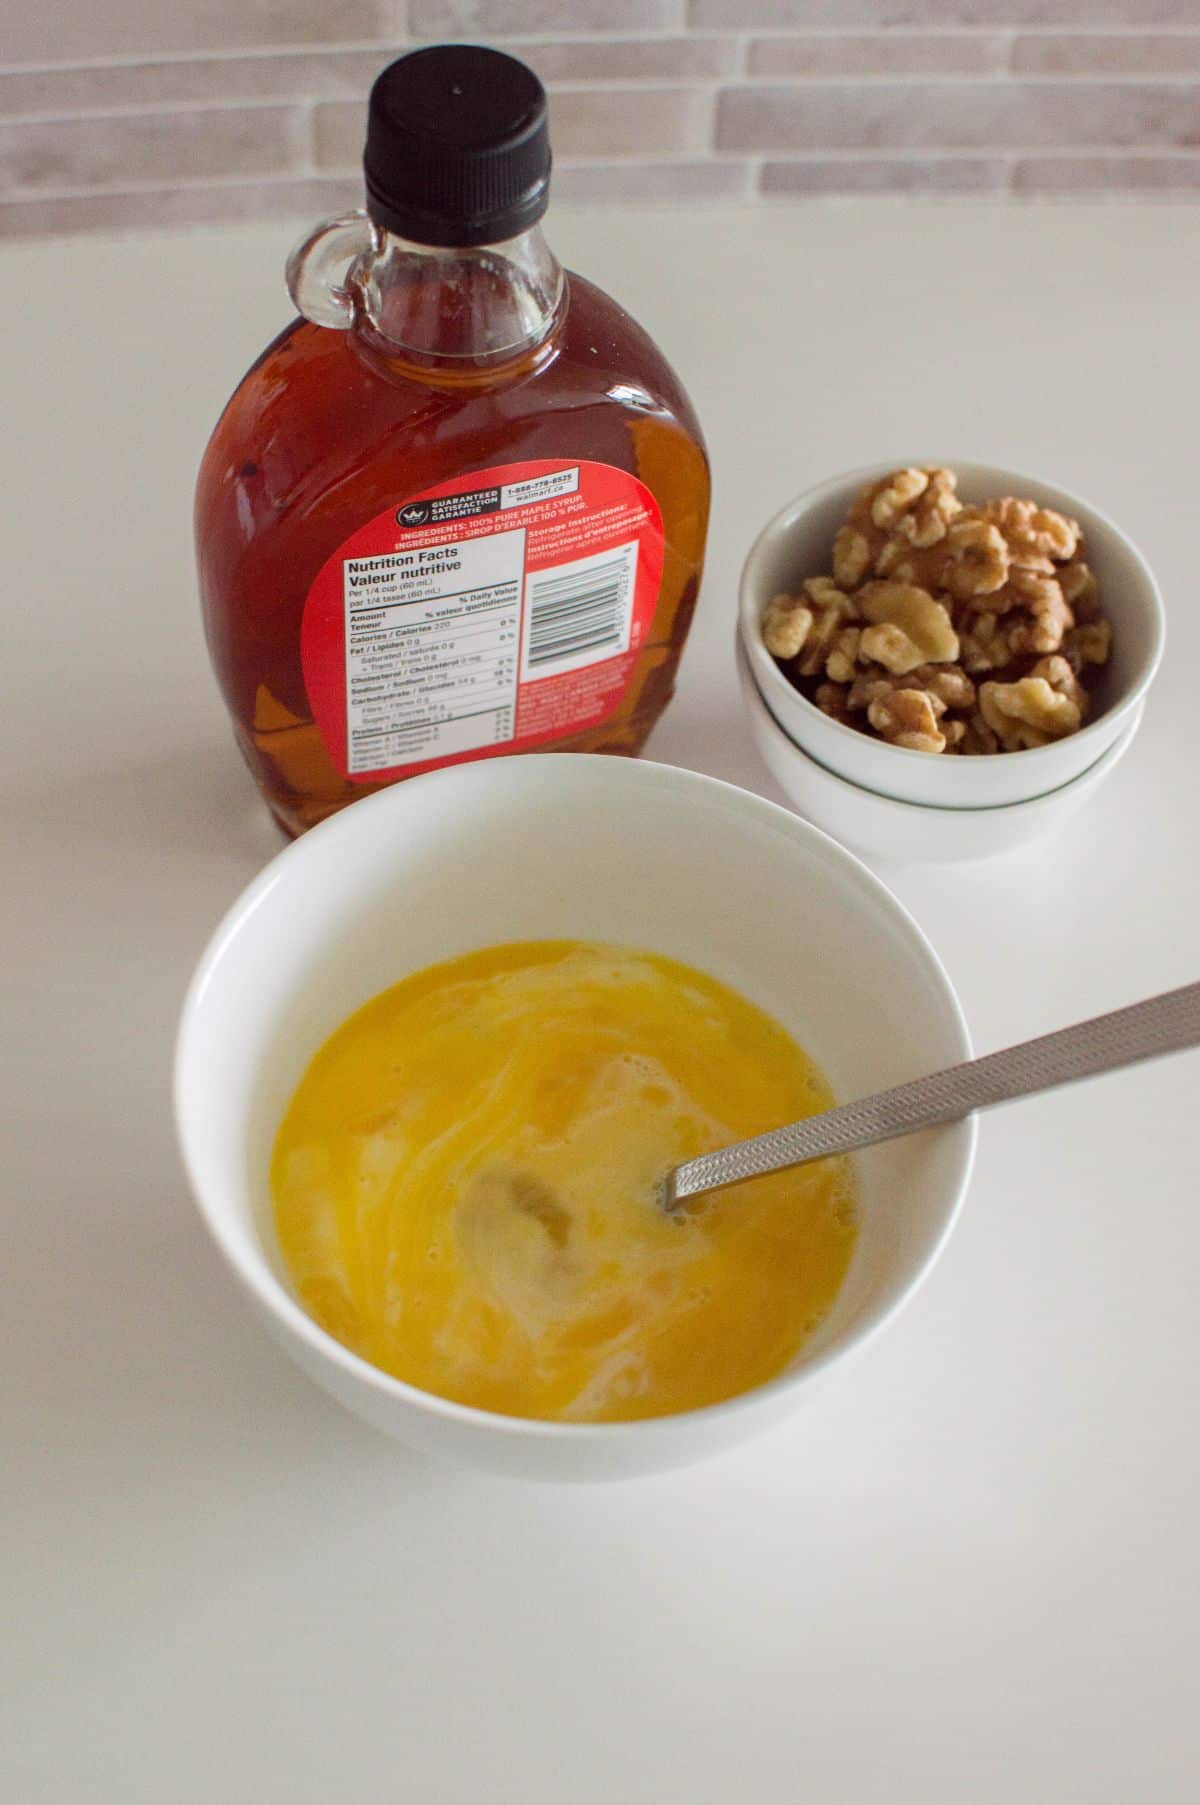 eggs, milk and maple syrup in a small mixing bowl.